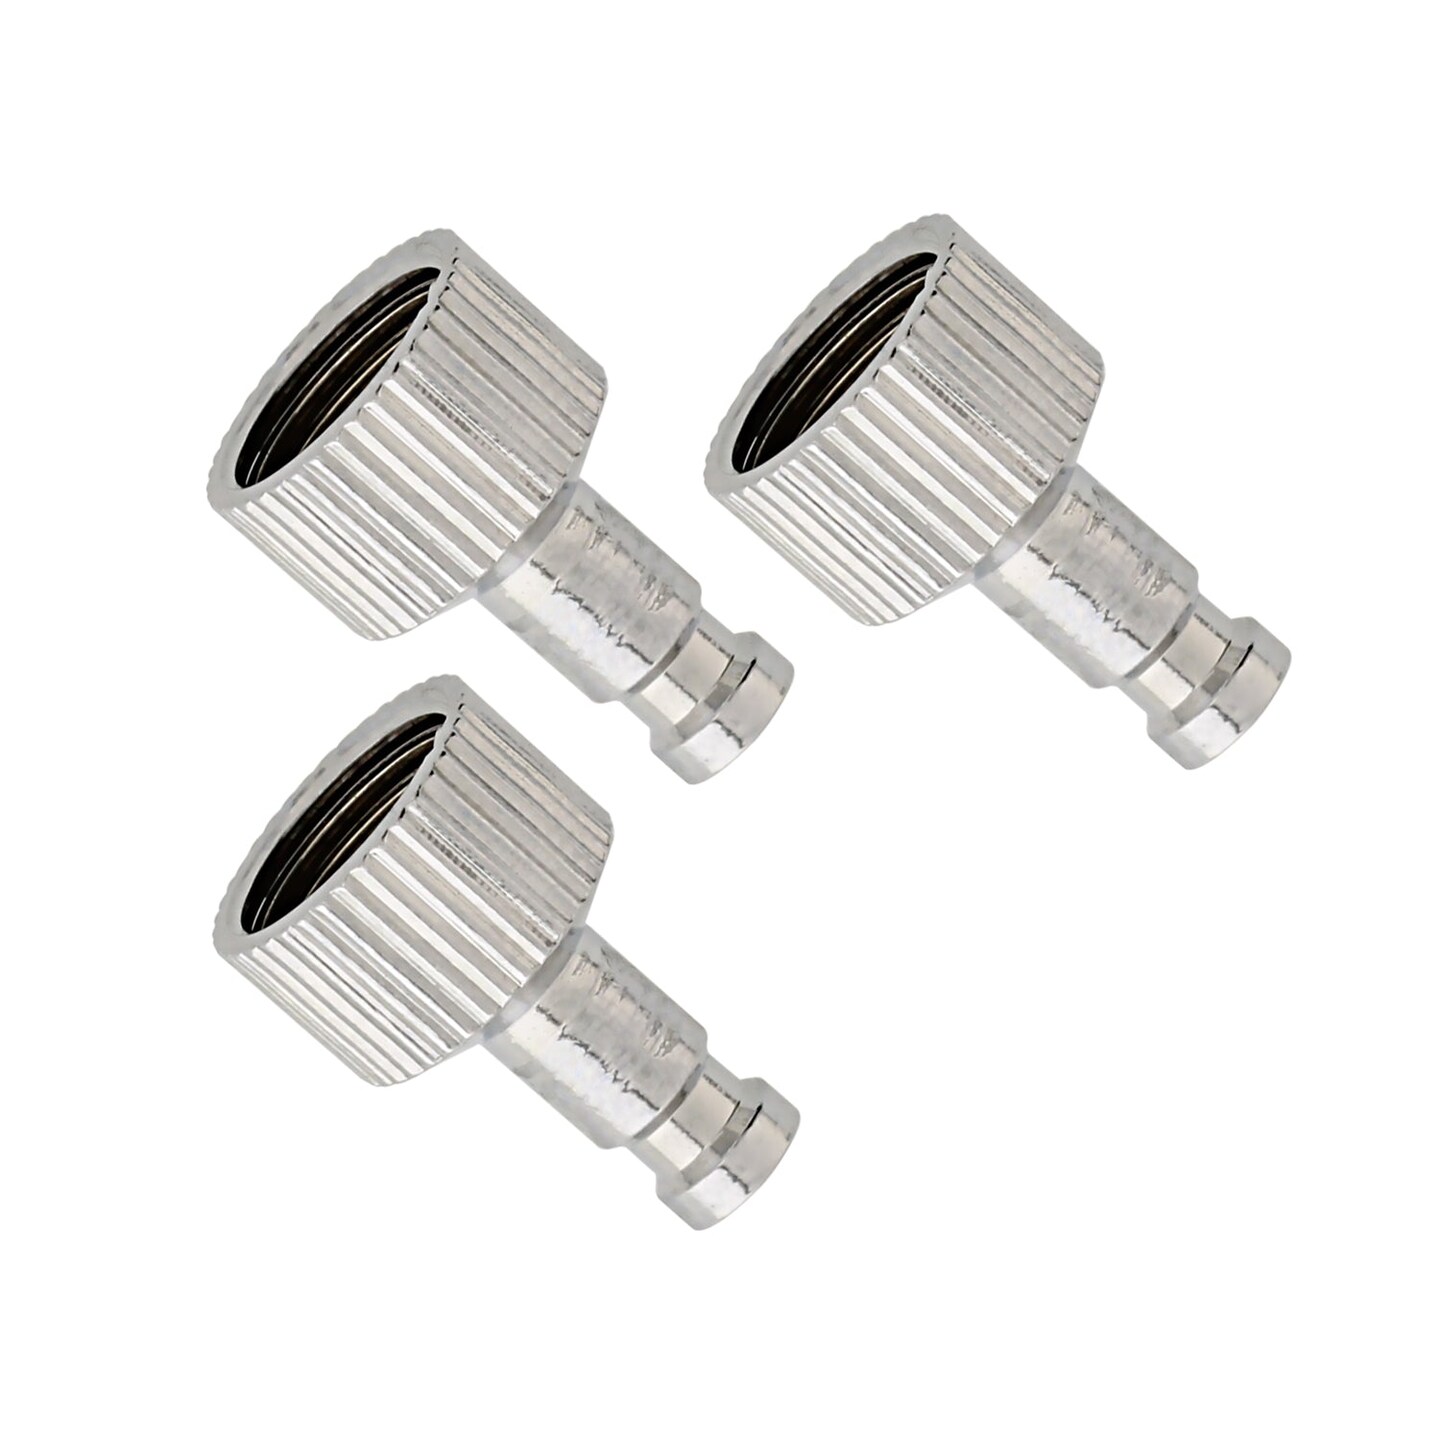 Set of 3 Airbrush Quick Release Coupler Plugs with 1/8&#x22; BSP Female Thread Connections and 5mm Male Nipple Tails (Quick Connect Coupler Not Included)